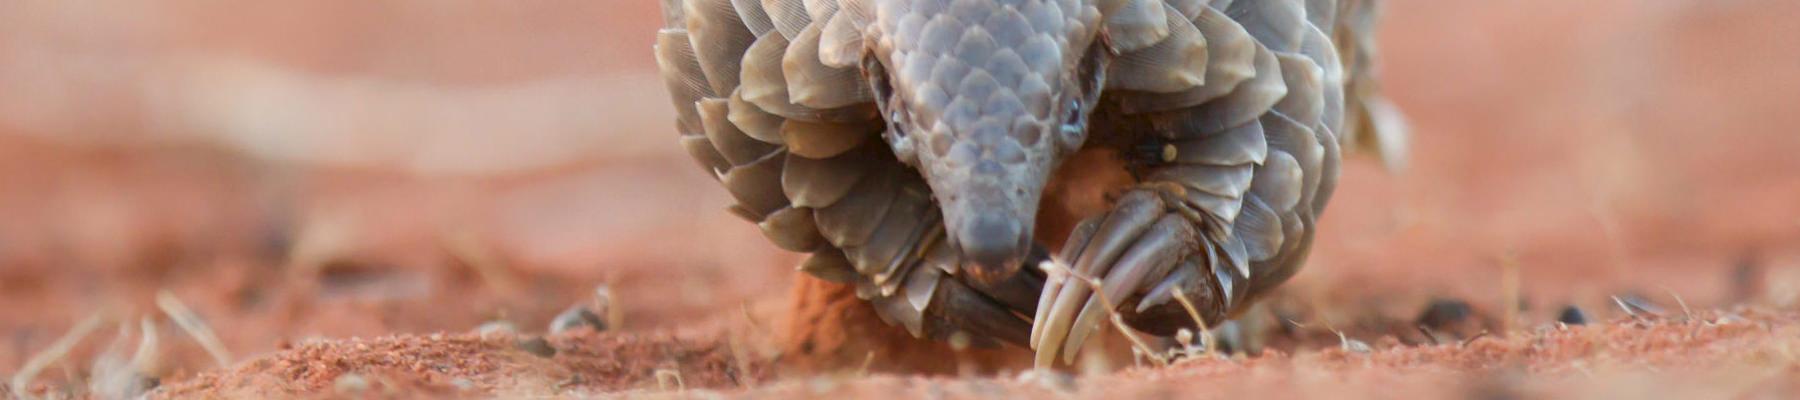 Ground Pangolin Manis temminckii, one of the African speices that appeared in trade post-2010 © Wendy Panaino